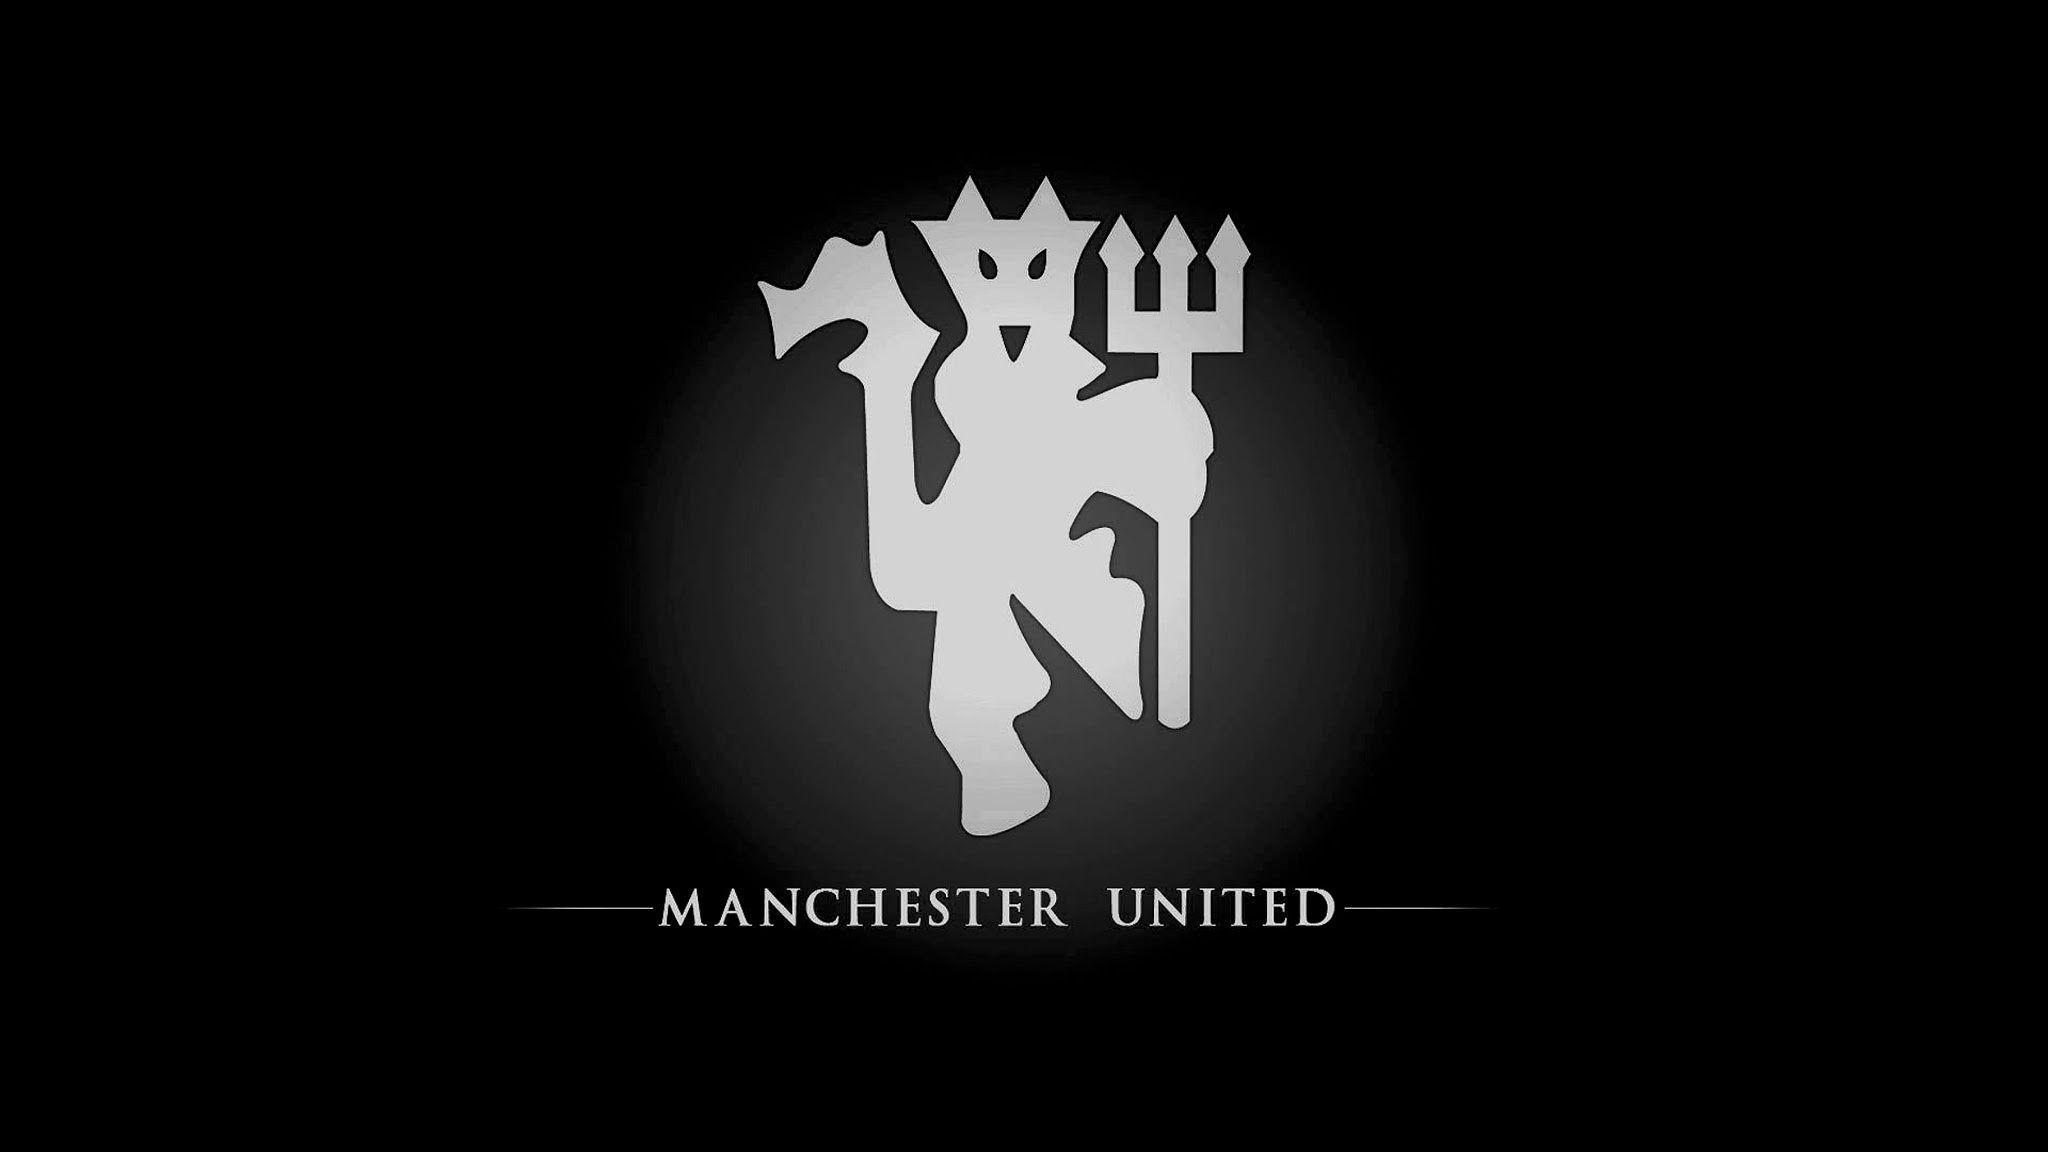 Manchester United Black Wallpaper For iPhone